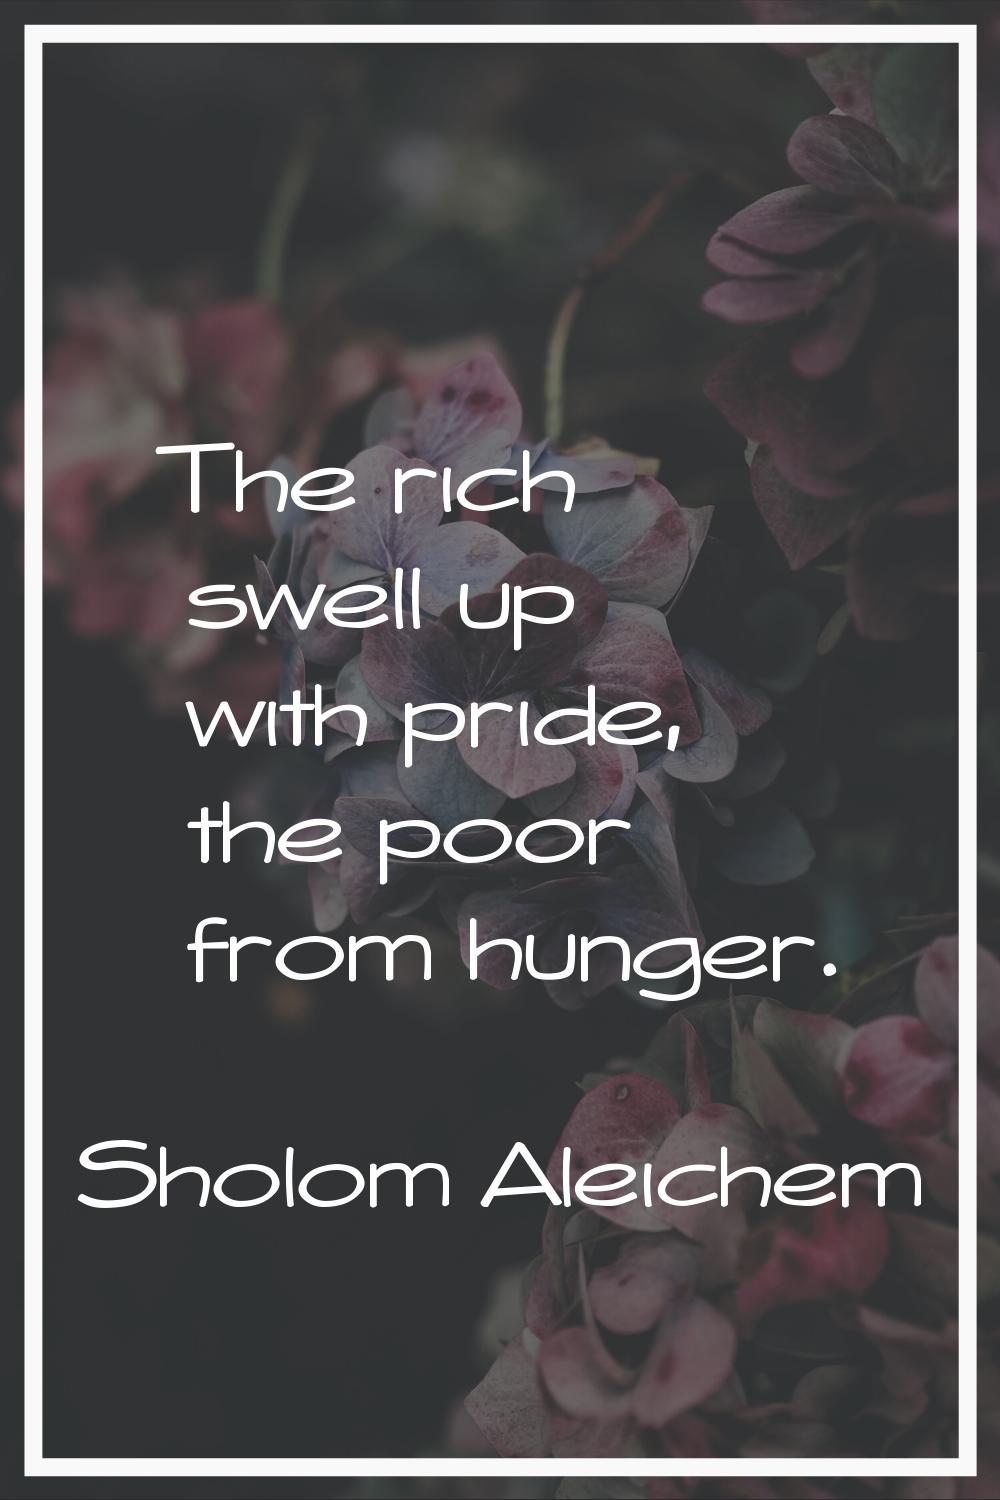 The rich swell up with pride, the poor from hunger.